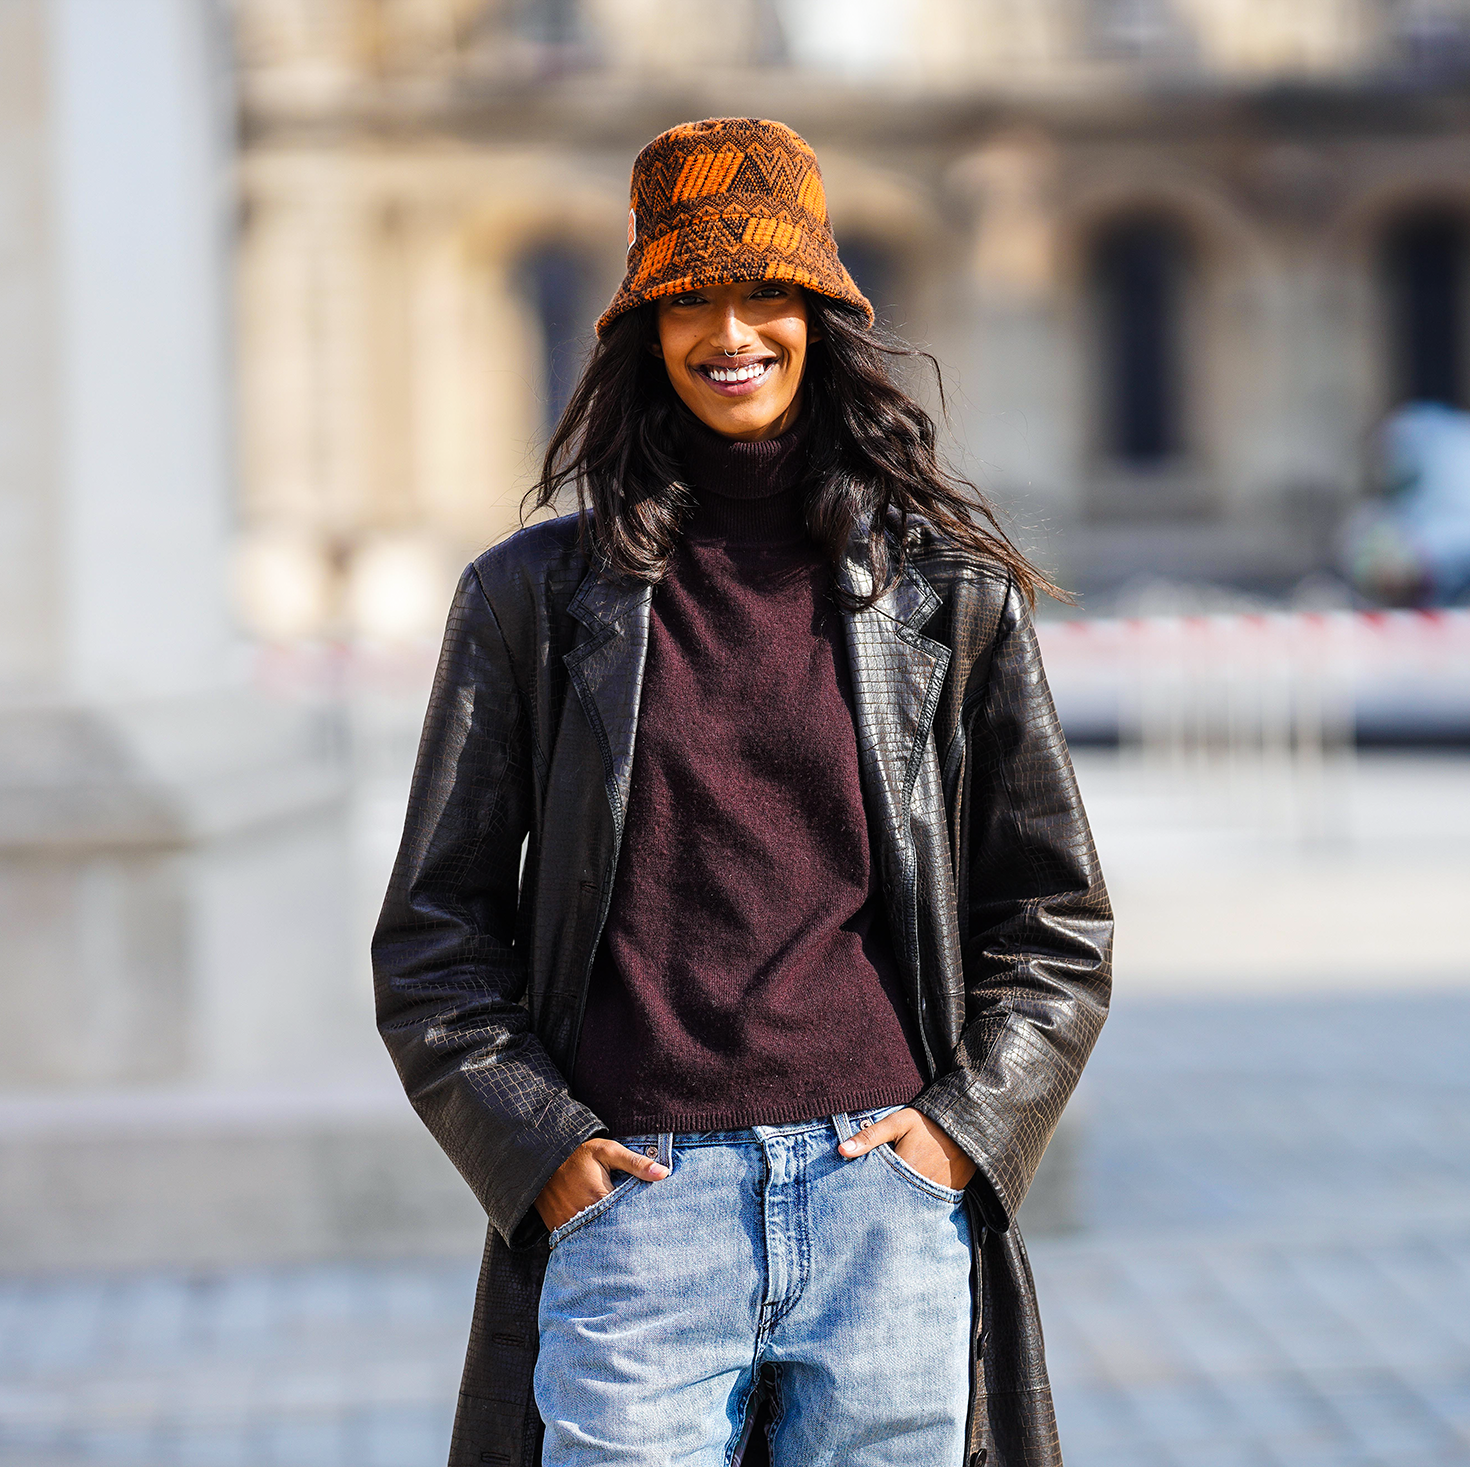 These Cute Hats Just Miiight Convince You to Start Your Fall Shopping